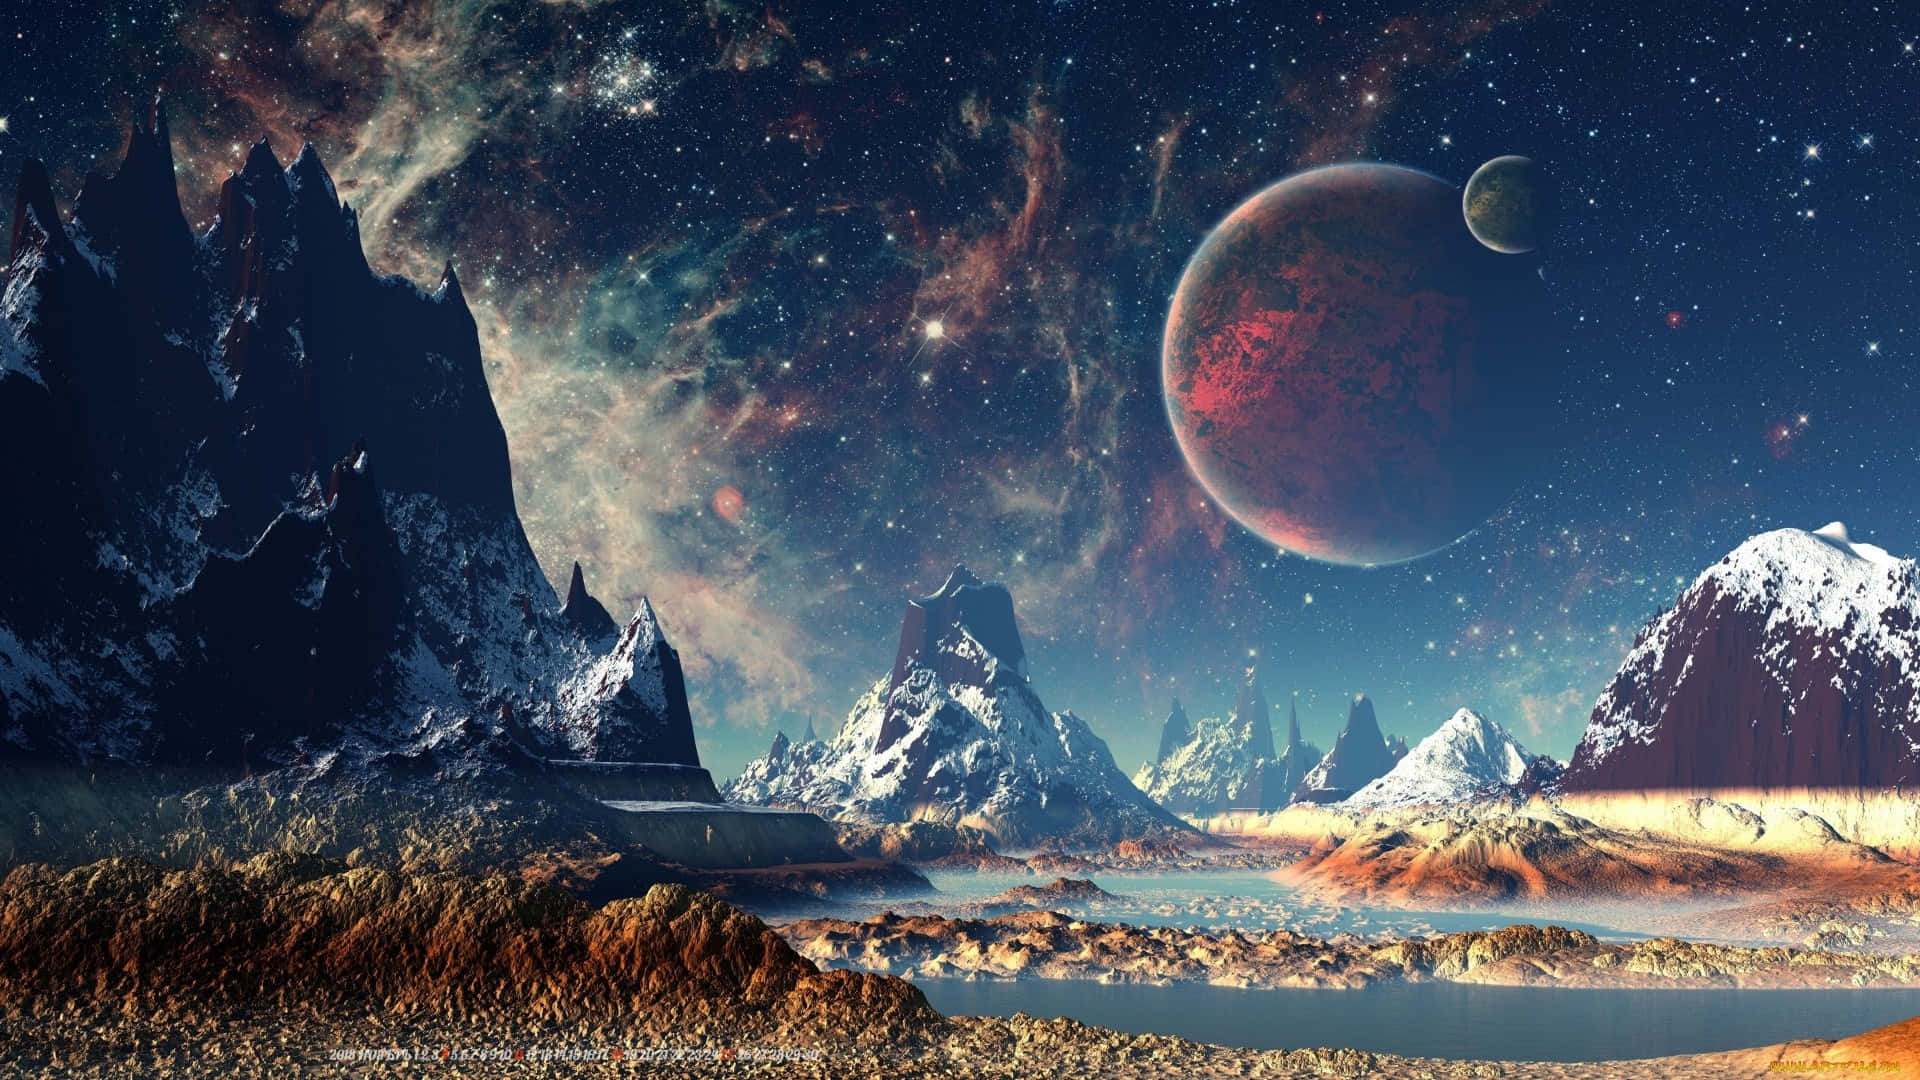 A Space Landscape With Mountains And A Lake Wallpaper